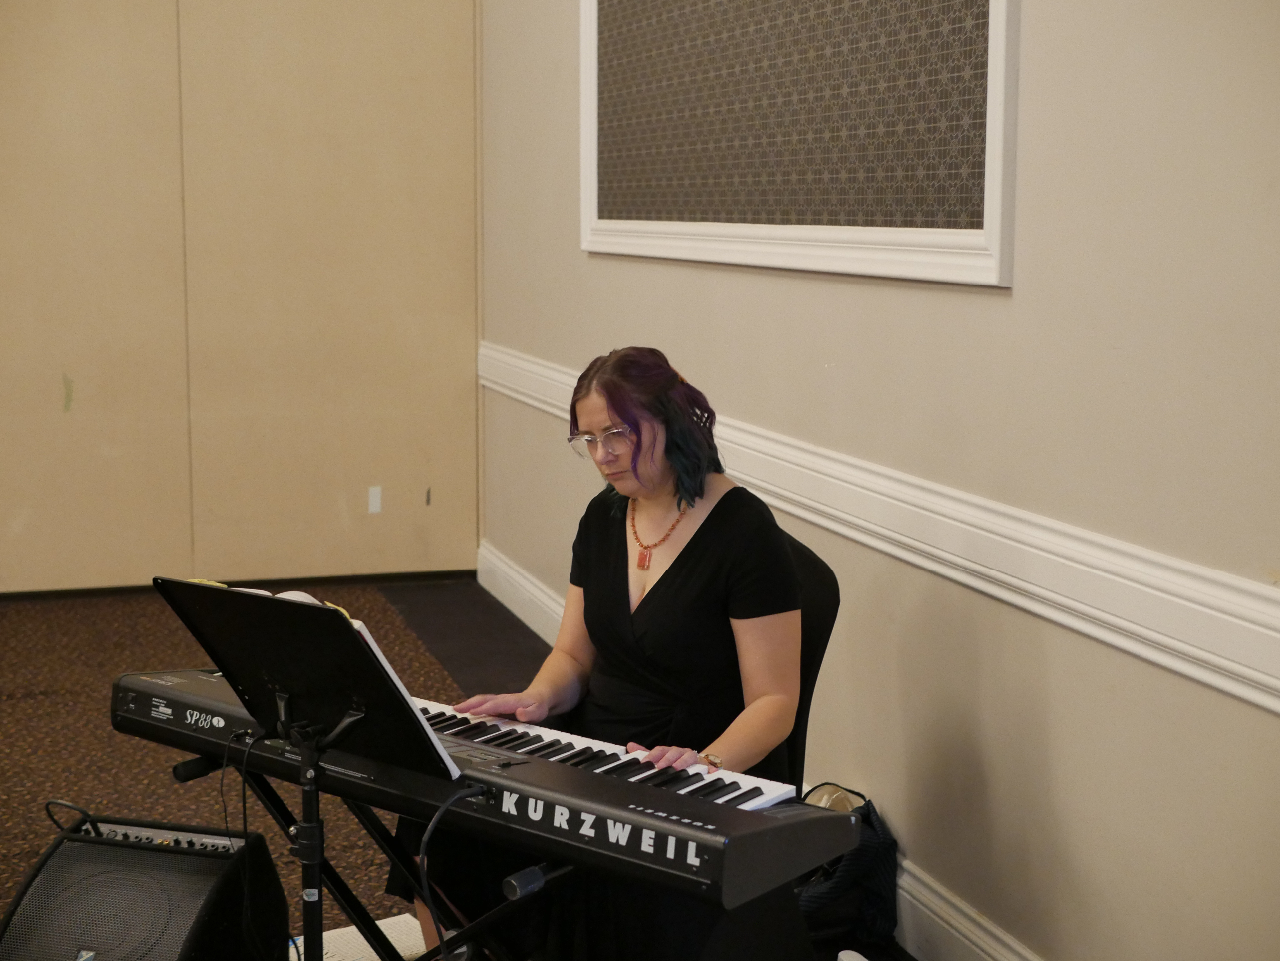 This photo features guest speaker Becky Verdun playing piano. She is seated and wearing a black dress.